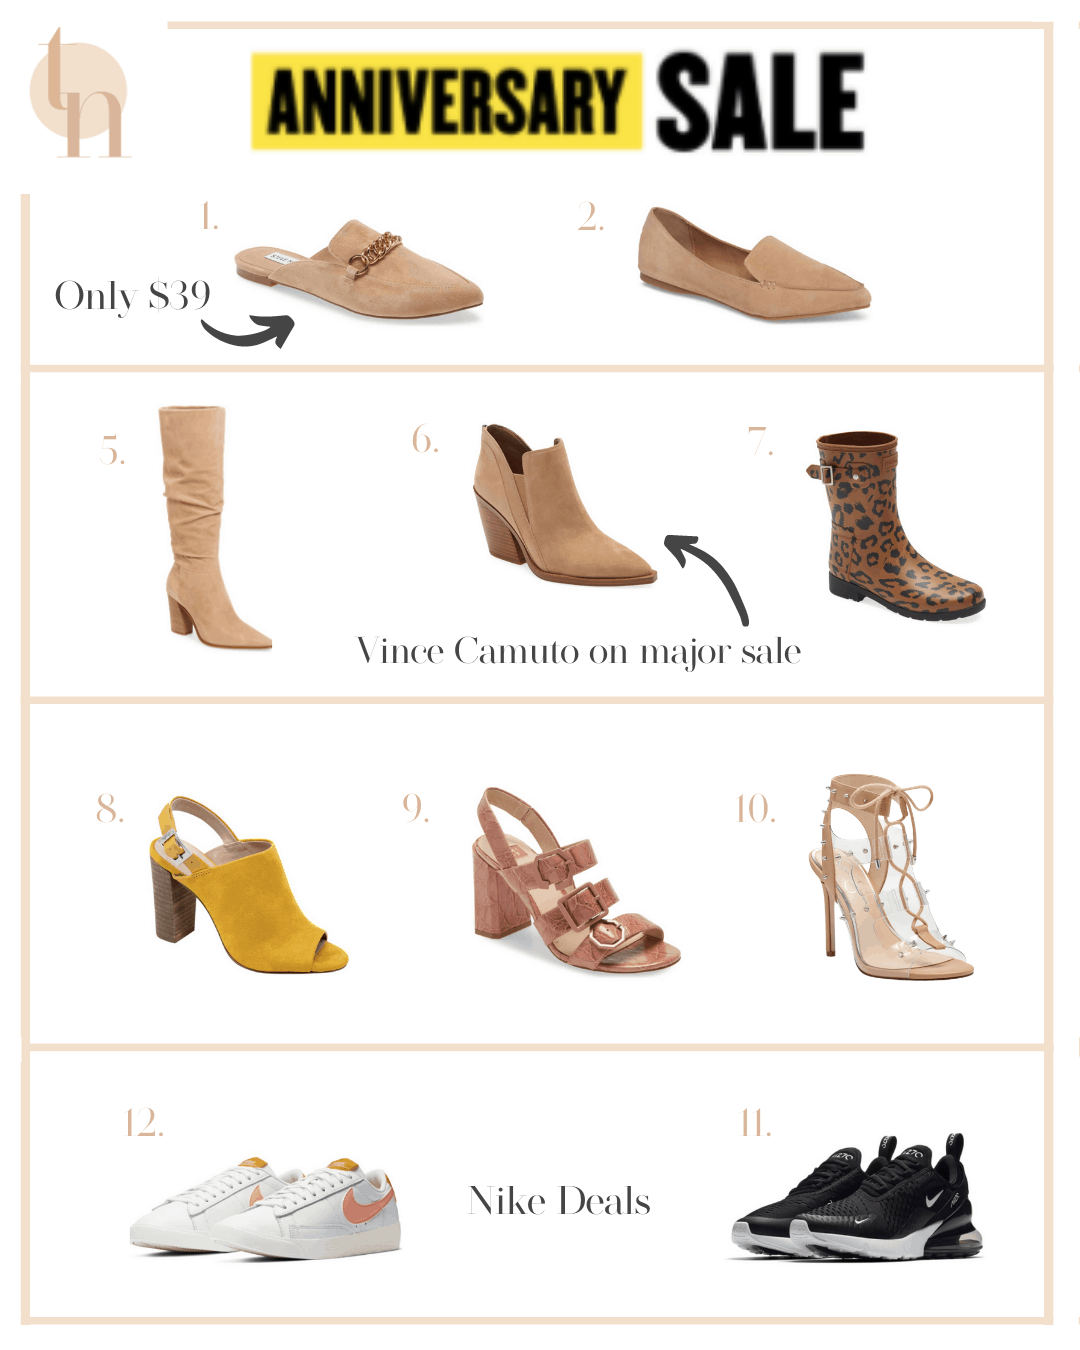 Nordstrom Anniversary Sale by popular Dallas life and style blog, Glamorous Versatility: collage image of Nordstrom Vince Camuto Gradina Block Heel Bootie, Vince Camuto Derika Leather Boot, Steve Madden Forever Chain Pointed Toe Mule, Nike Blazer Low SE Sneaker, Treasure & Bond Kallie Mule, Steve Madden Leopard Loafer, Steve Madden Studded Sneaker, Steve Madden Black Loafer, Hunter Leopard Print Rain Boot, Louise Et Cite Heel Sandal, Jessica Simpson Dressy Heel Sandal, Charles by Charles David Slingback, and BP Heeled Mule